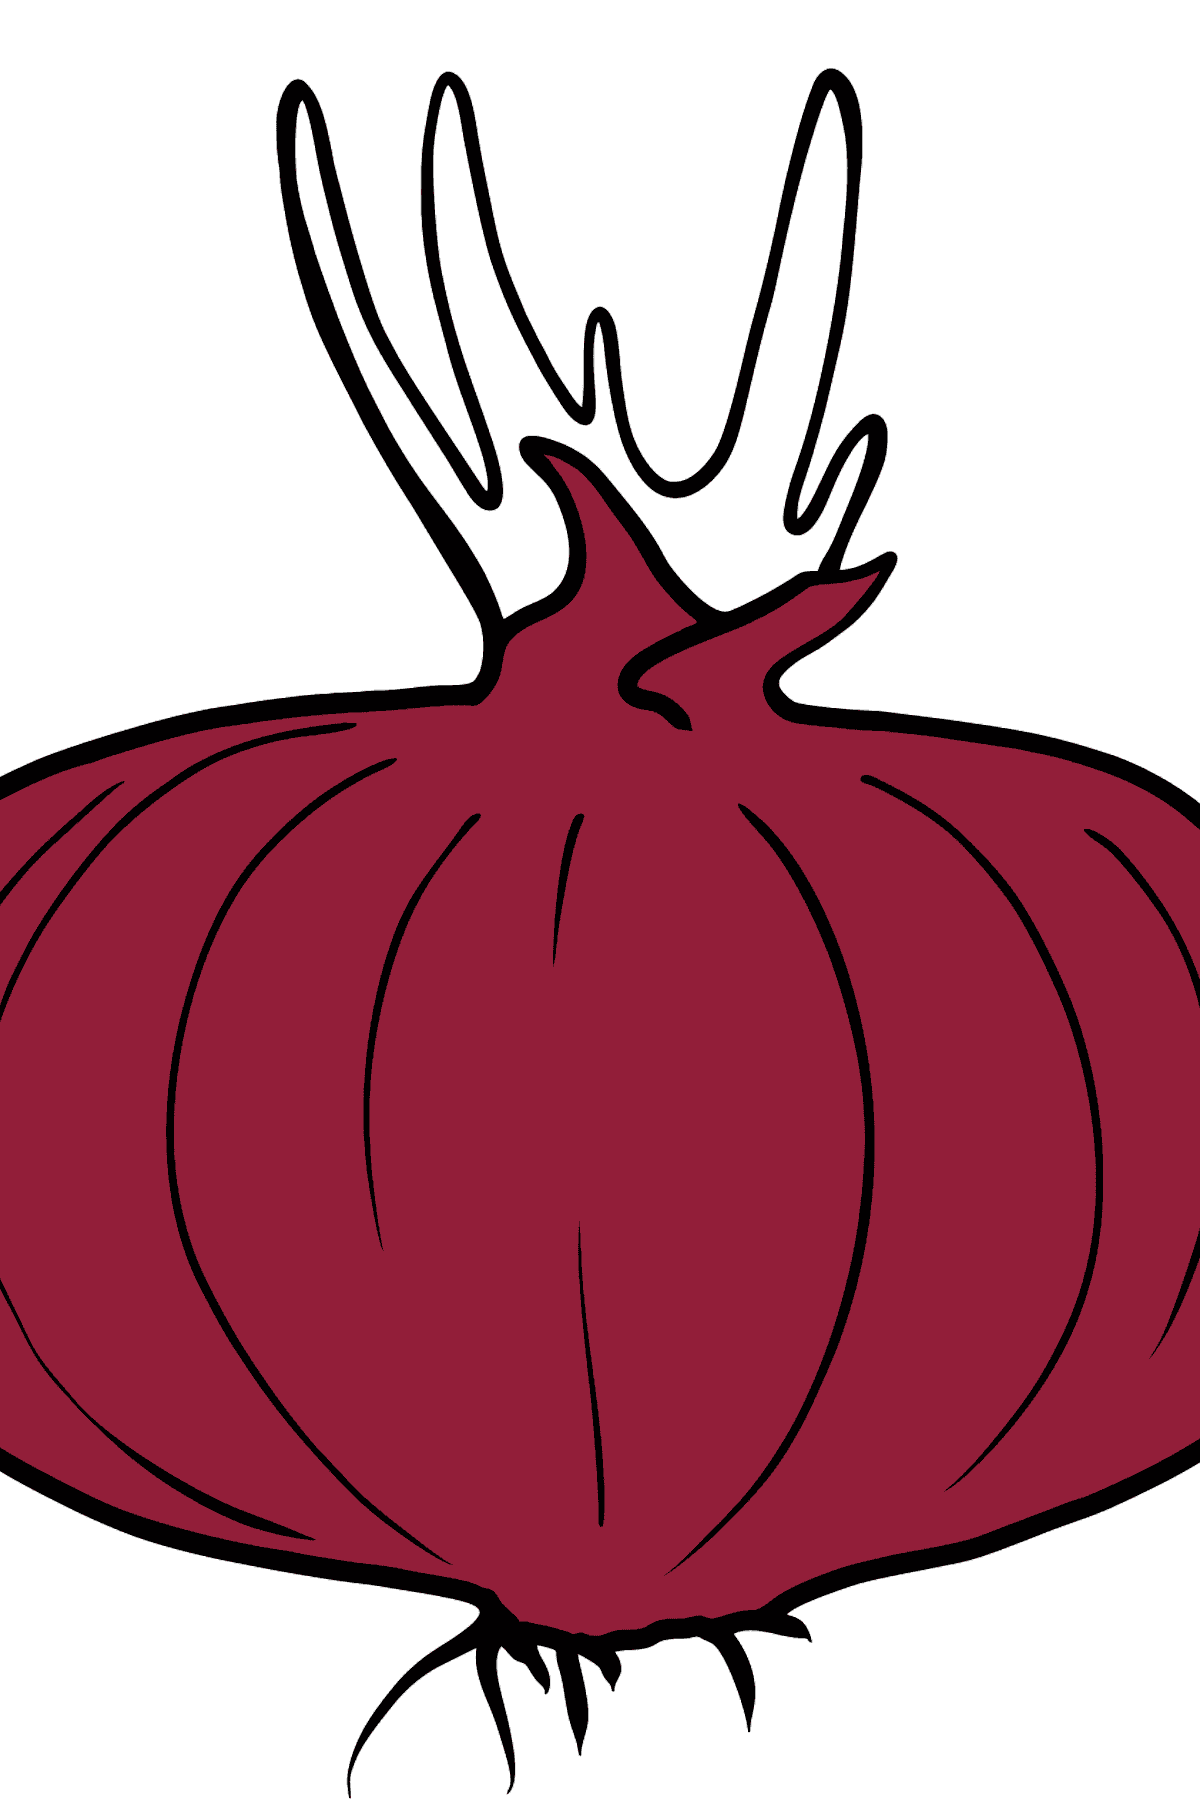 Red Onion coloring page - Coloring Pages for Kids